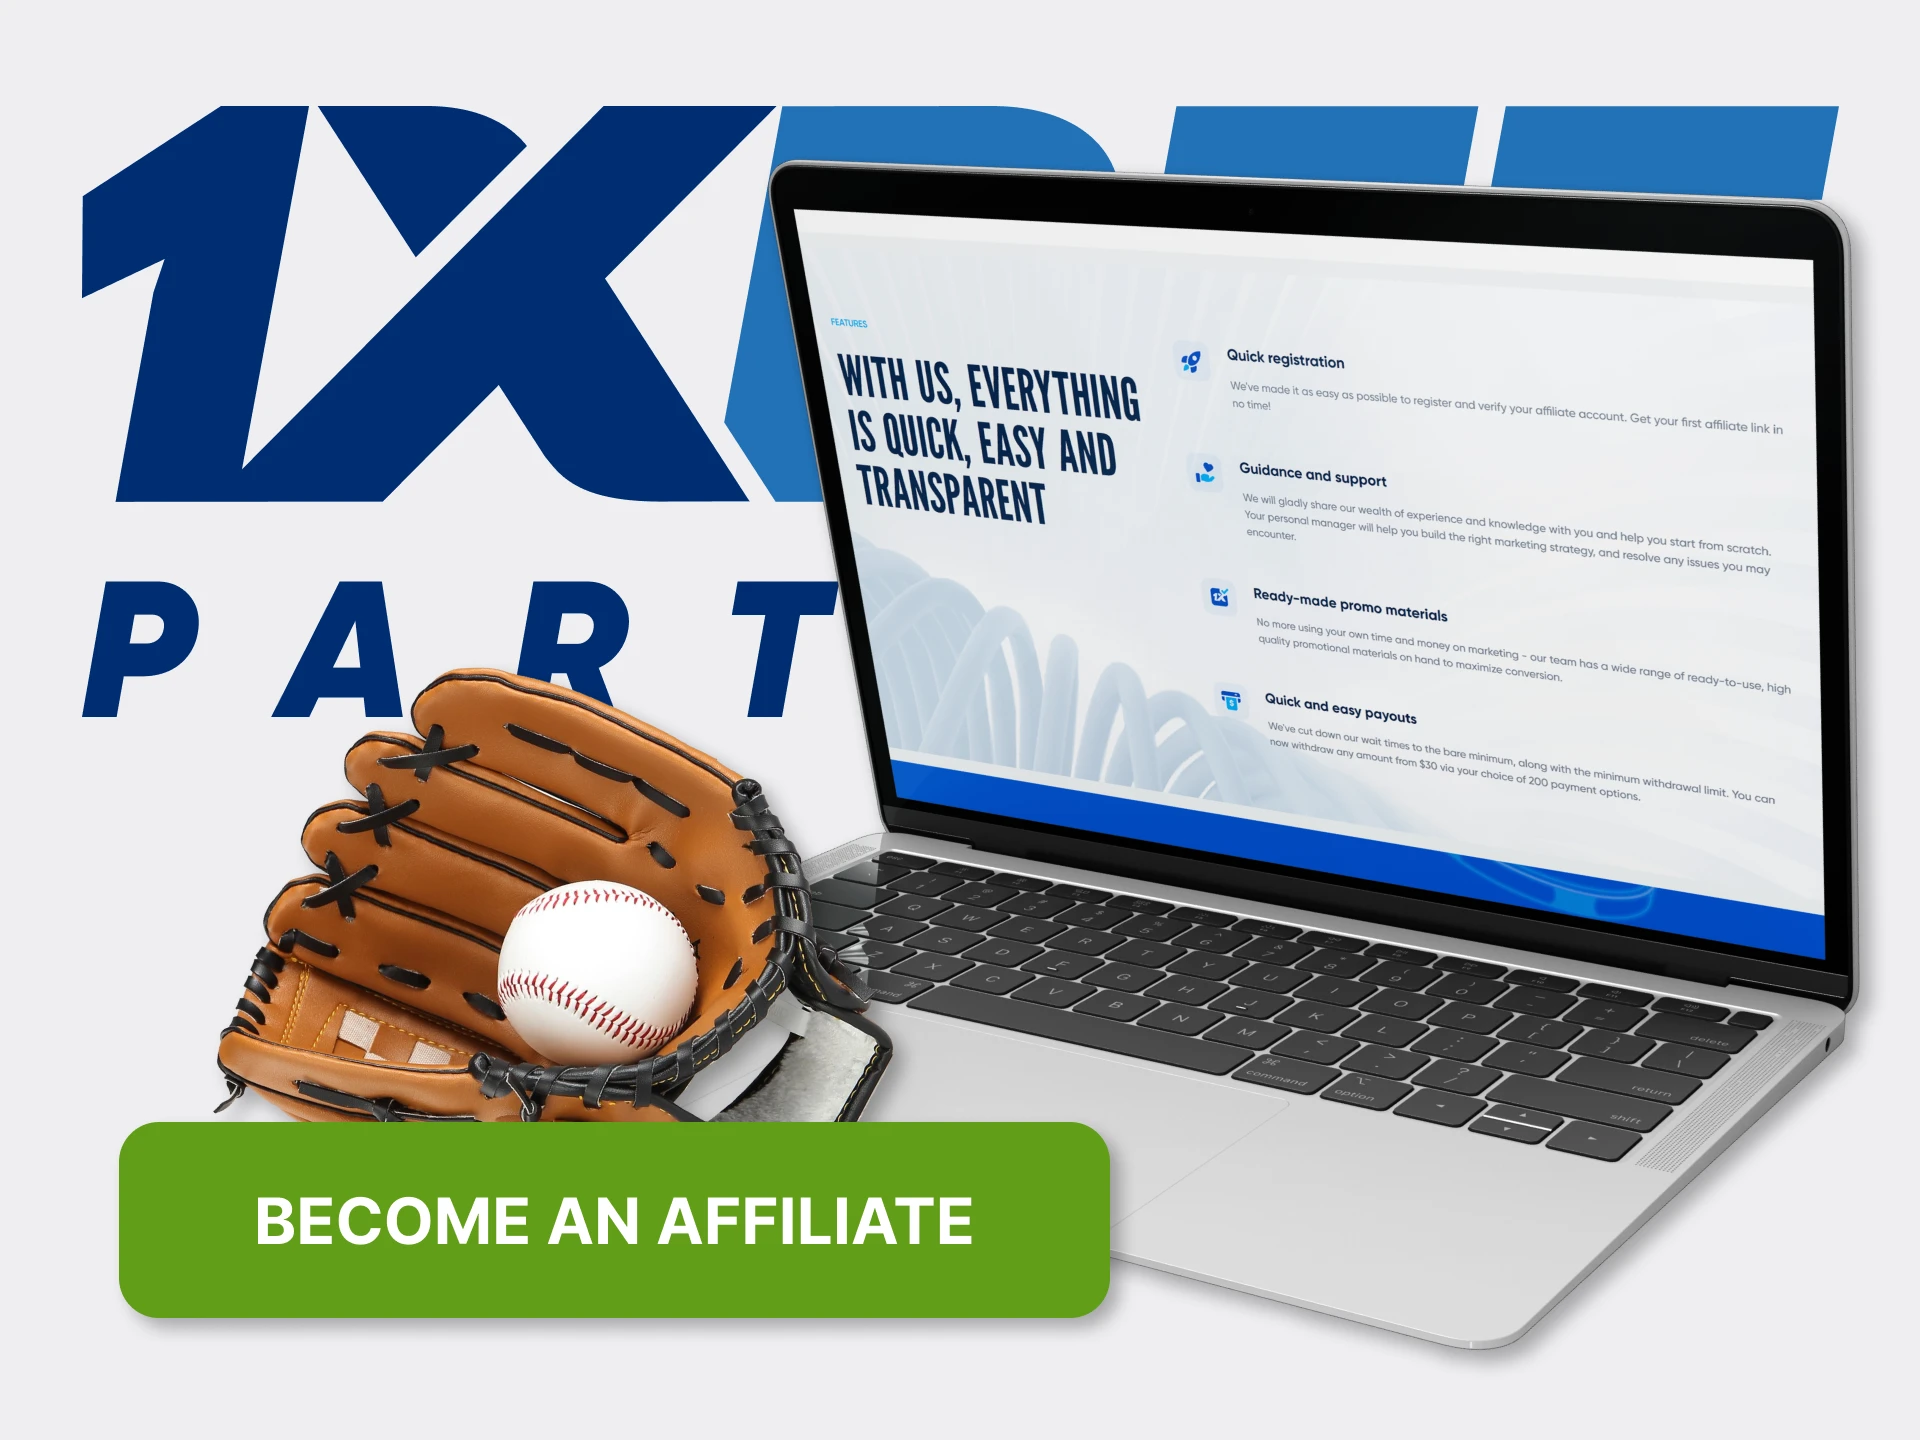 Become an affiliate program partner 1xBet, it is profitable and convenient.